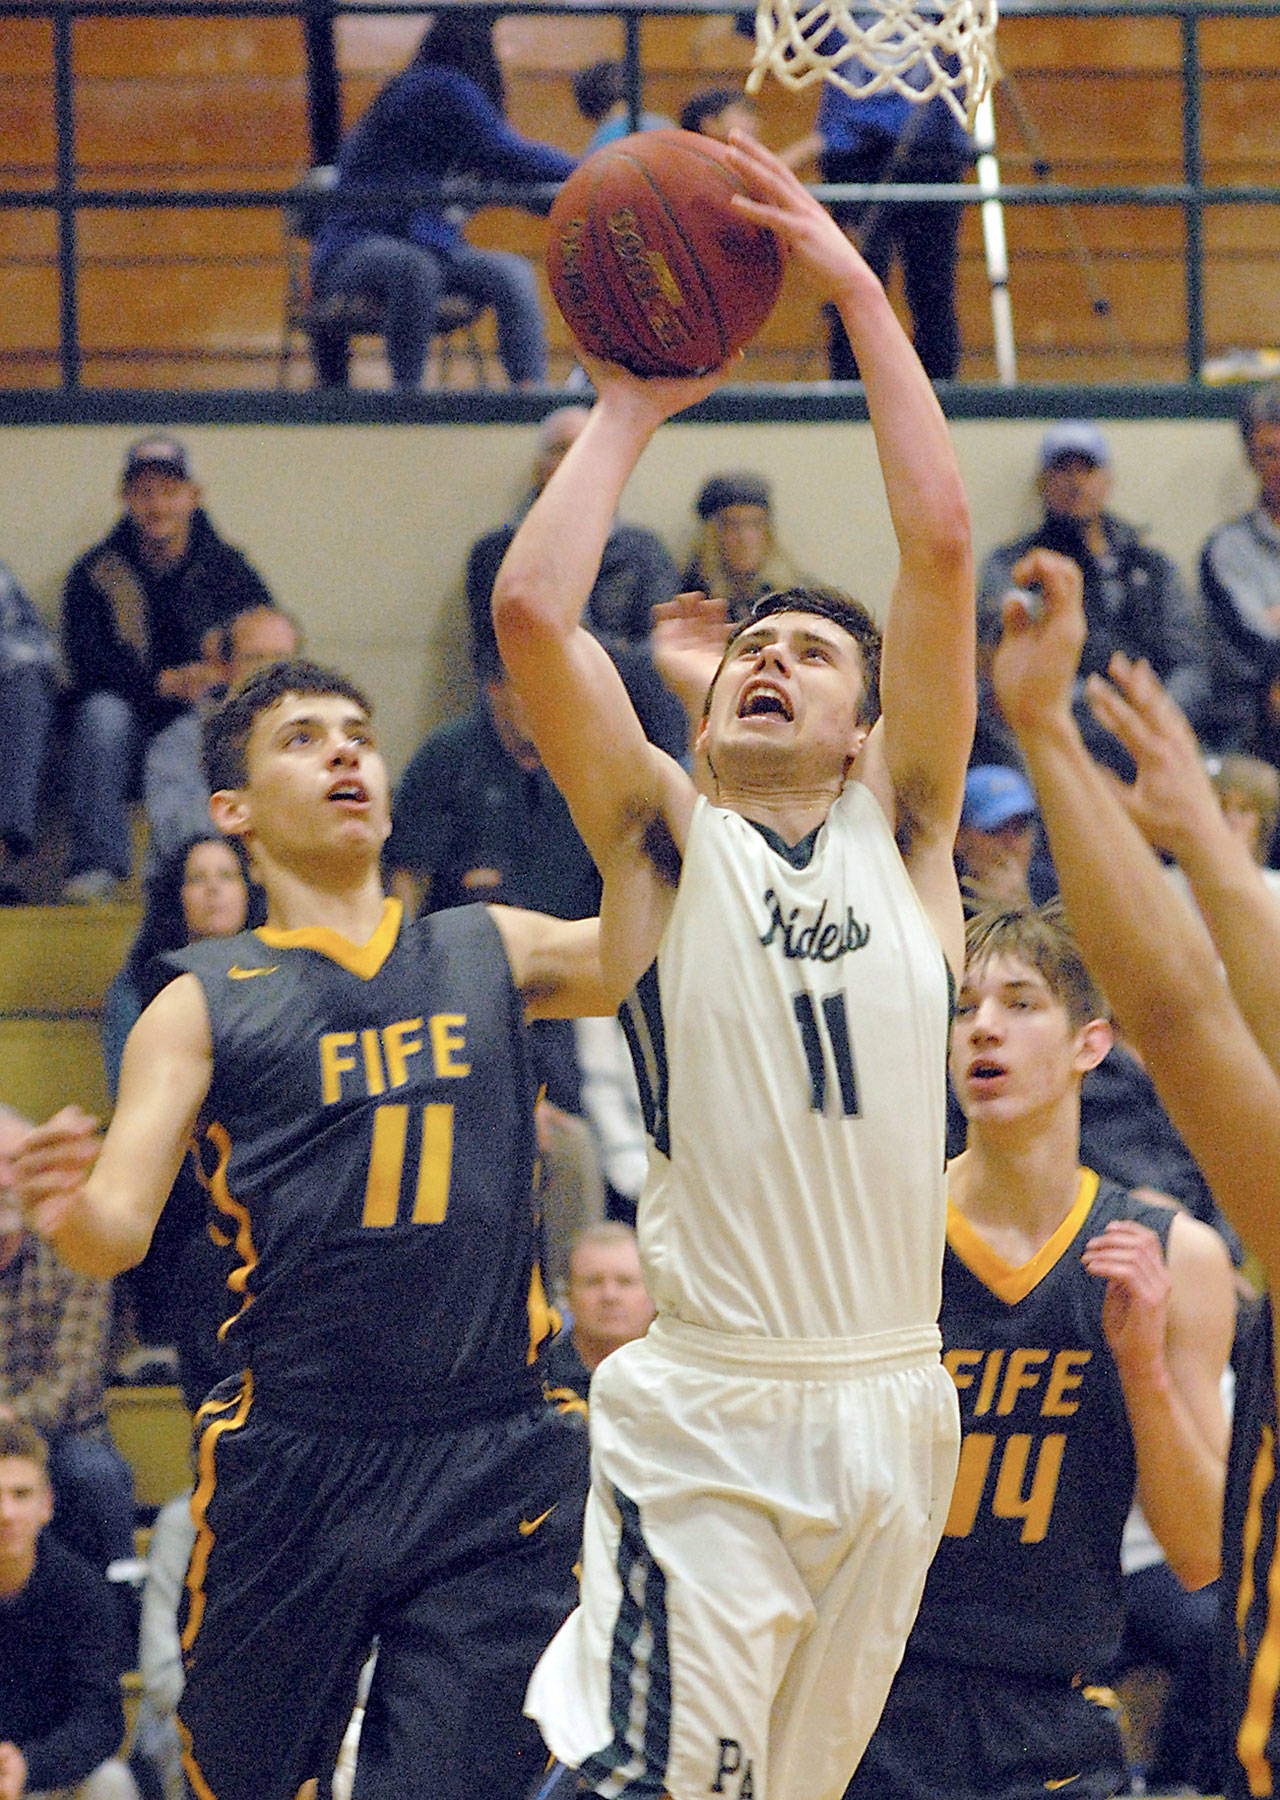 Keith Thorpe/Peninsula Daily News Port Angeles’ Kyle Benedict, center, goes for the basket over the defense of Fife’s Malachi Afework, left, during the second quarter on Thursday in Port Angeles.